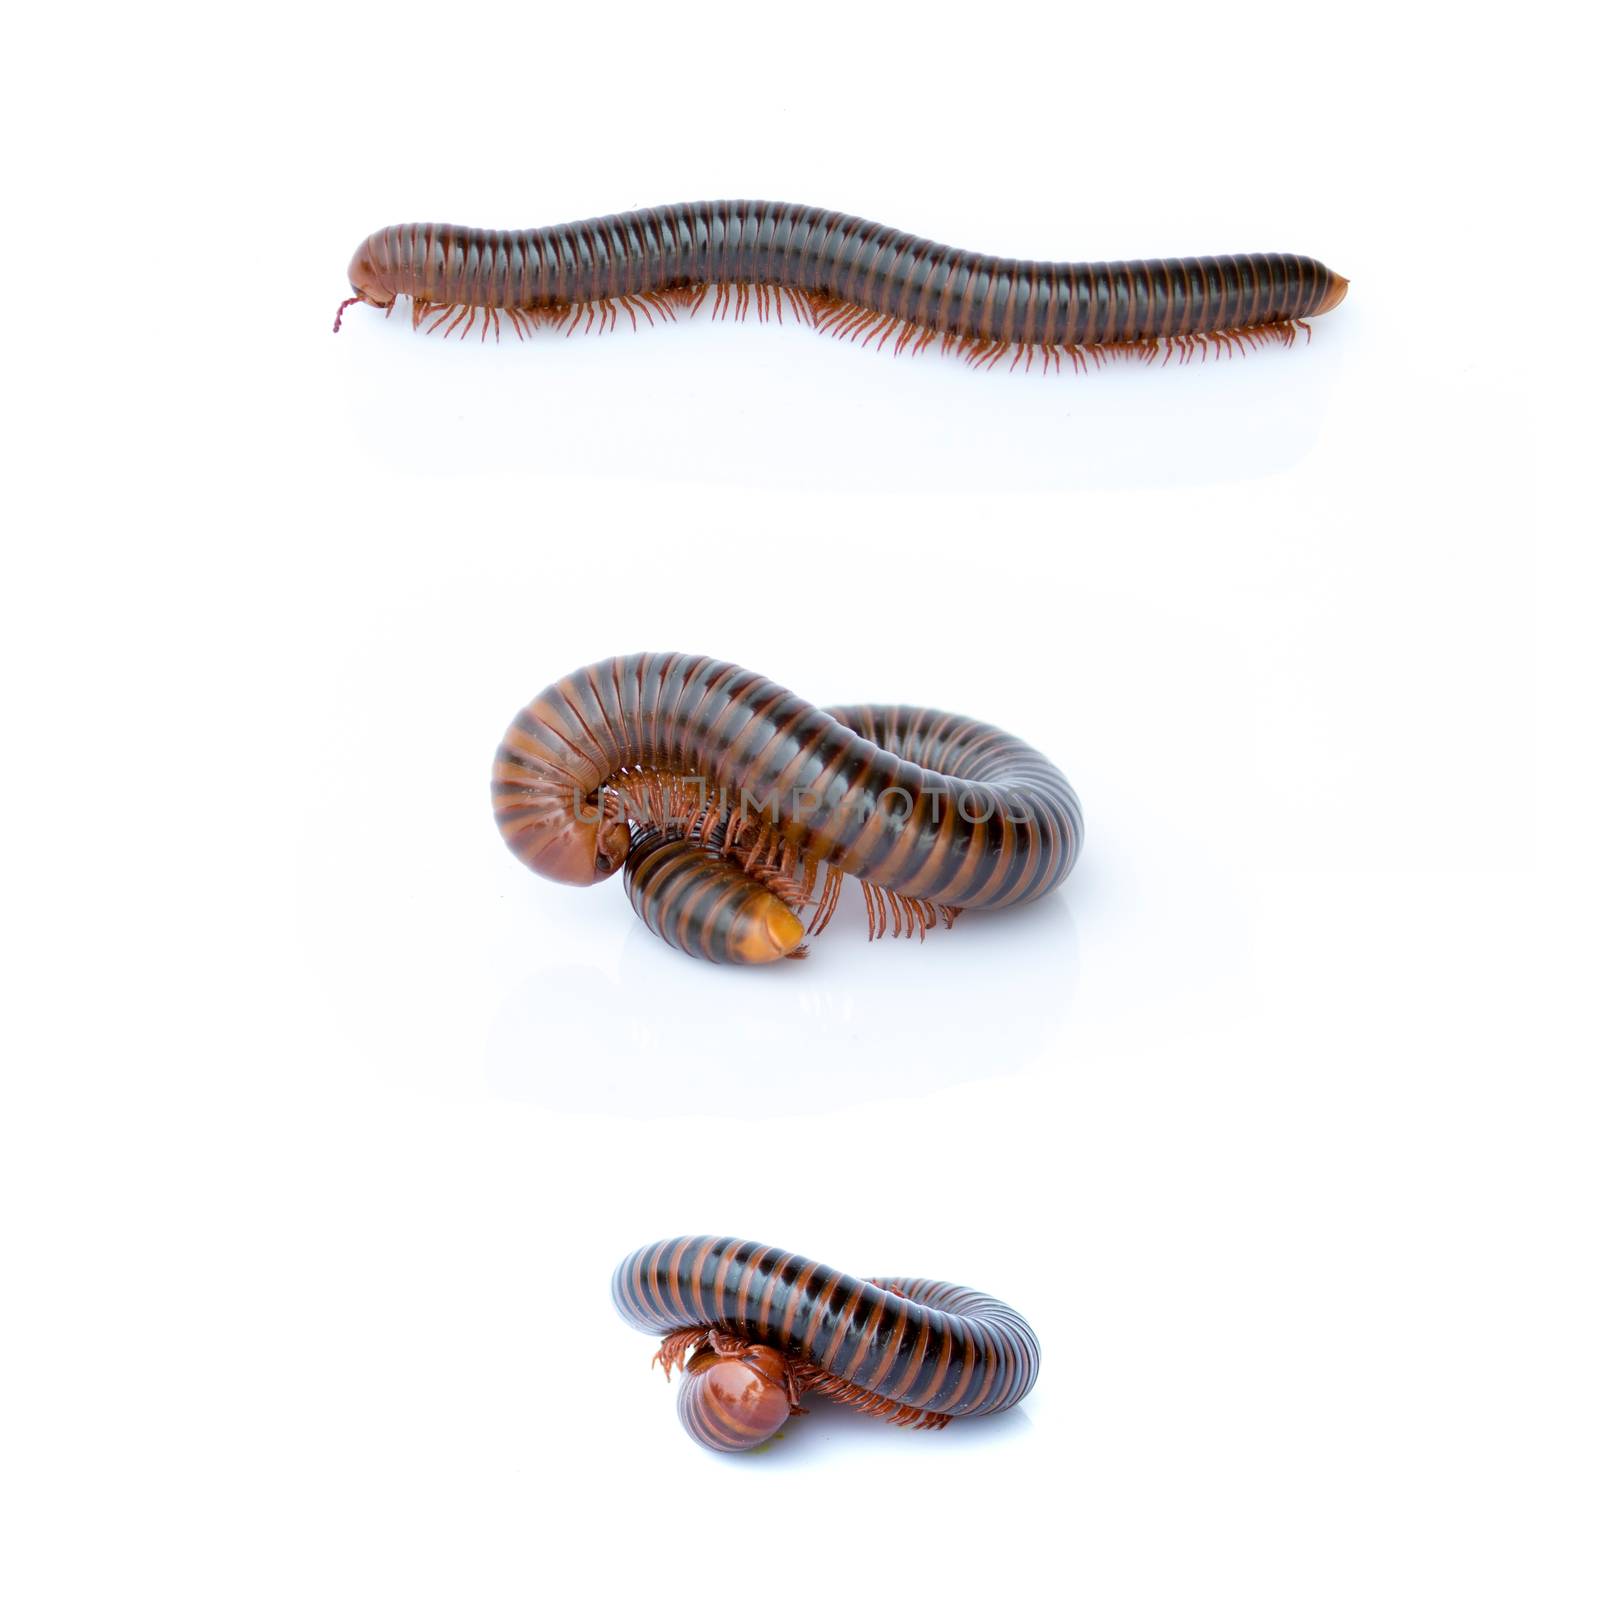 Image of a millipede on white background. Reptile Animal.